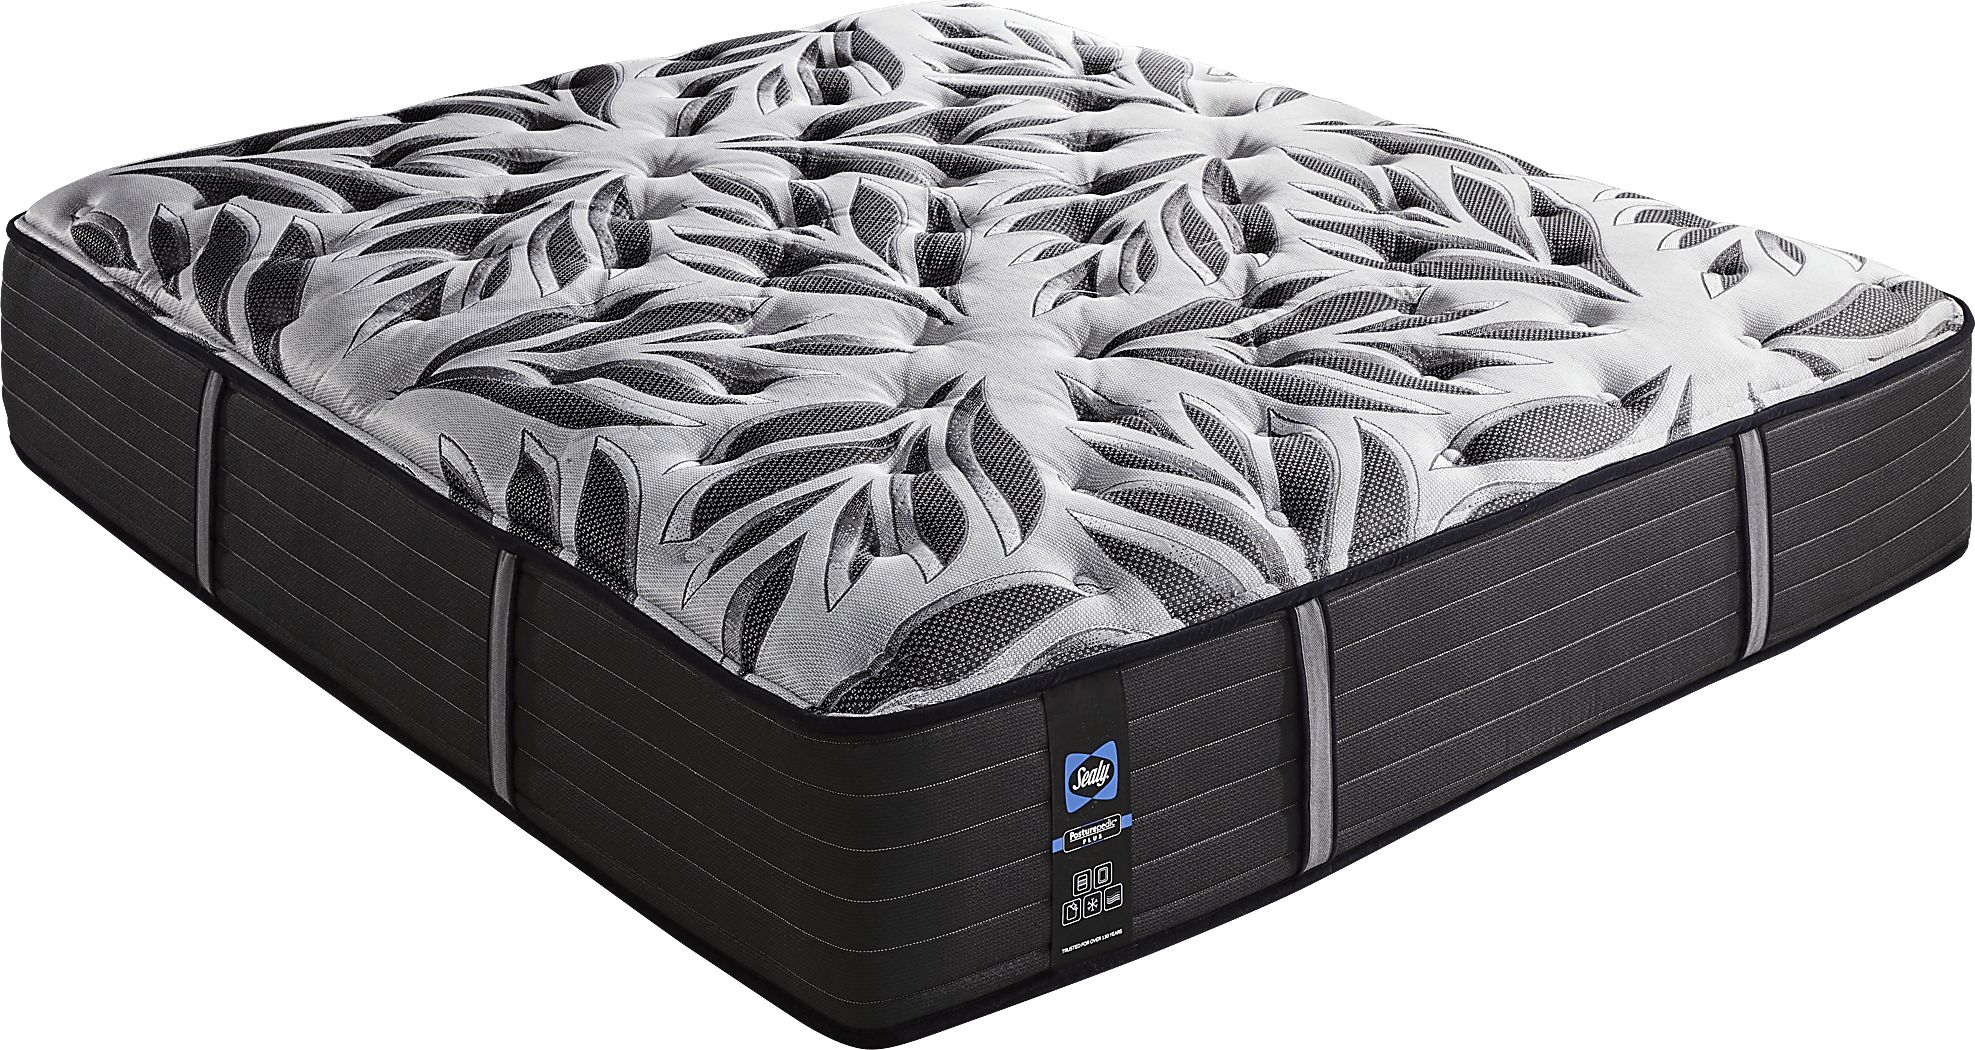 weight of sealy cal king mattress